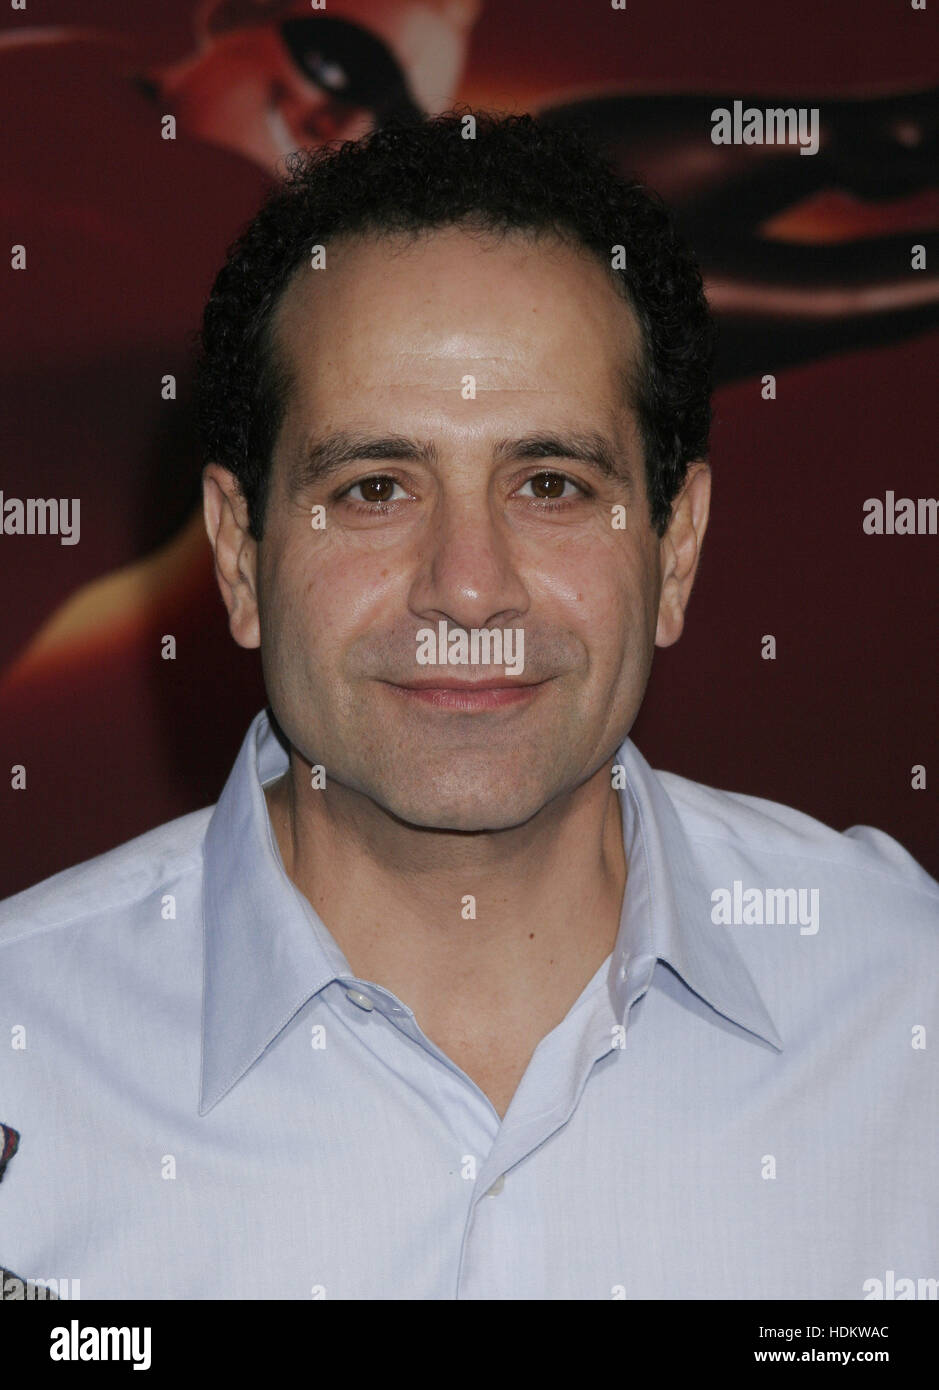 Tony Shalhoub at the premiere for 'The Incredibles' on October 24, 2004 in Los Angeles, California. Photo credit: Francis Specker Stock Photo